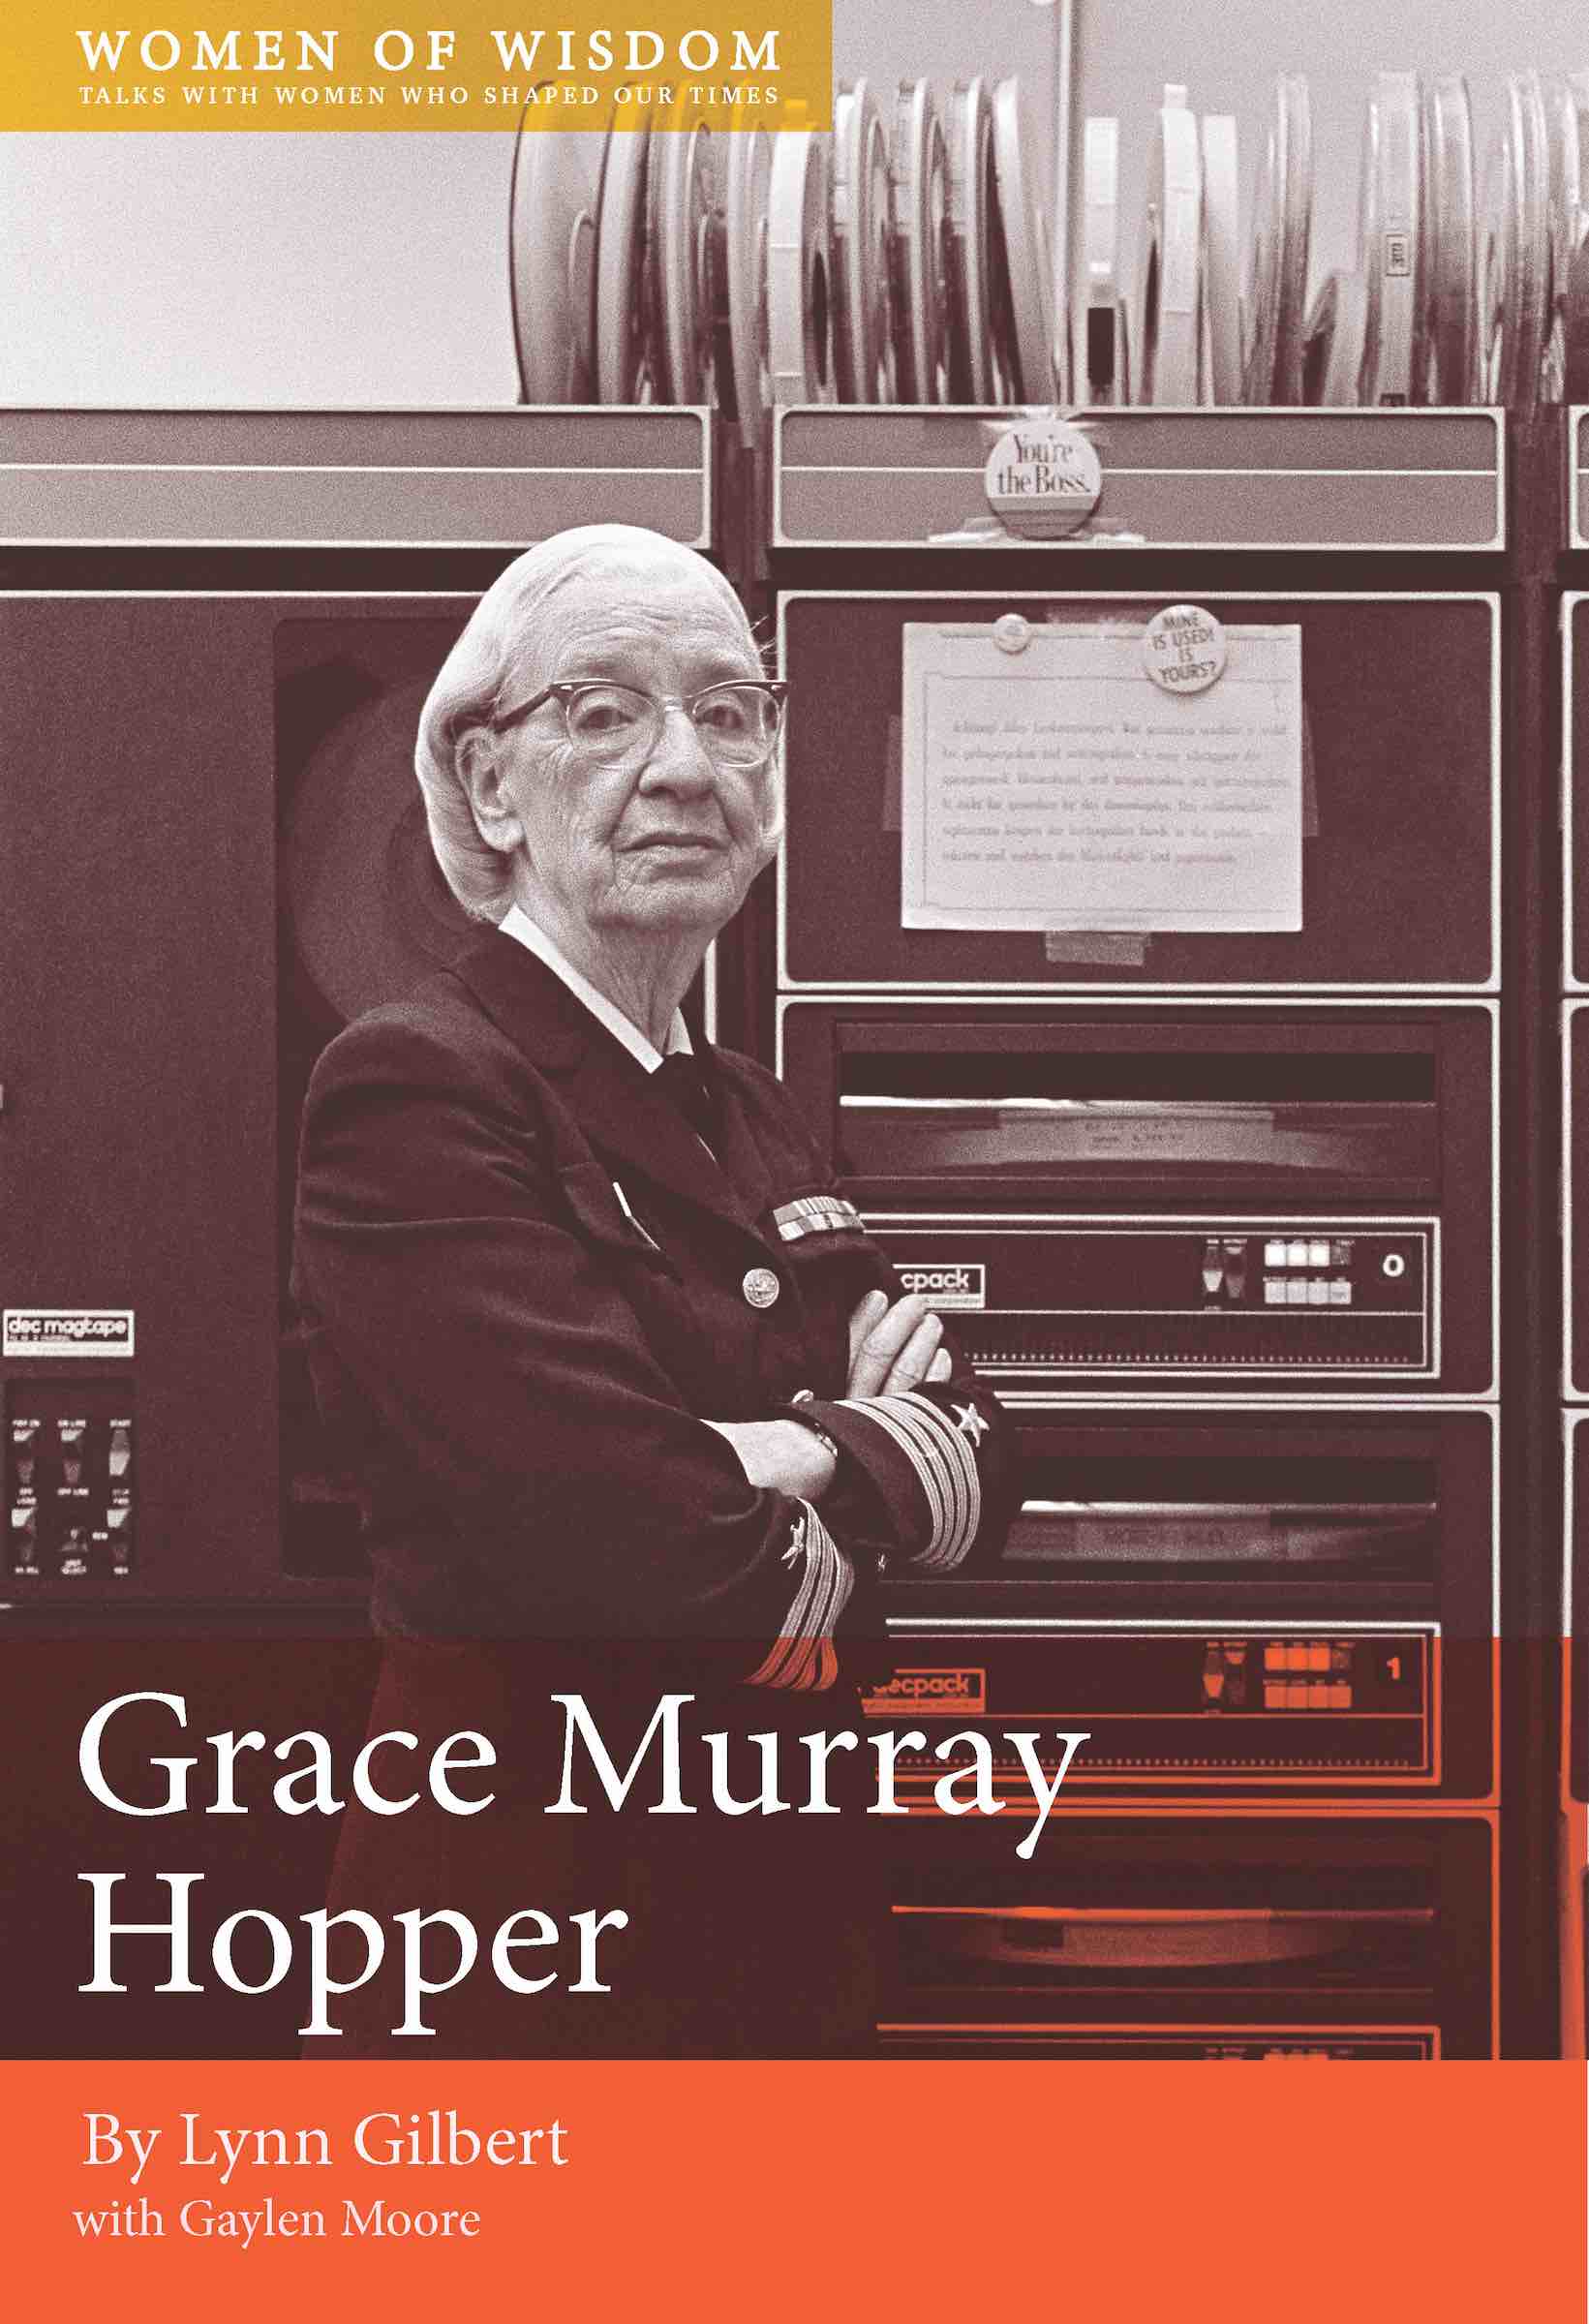 Want to know more about this pioneer? Read Lynn Gilberts chapter on Grace Murray Hopper in Women of Wisdom: Talks with Women who Shaped our Times.